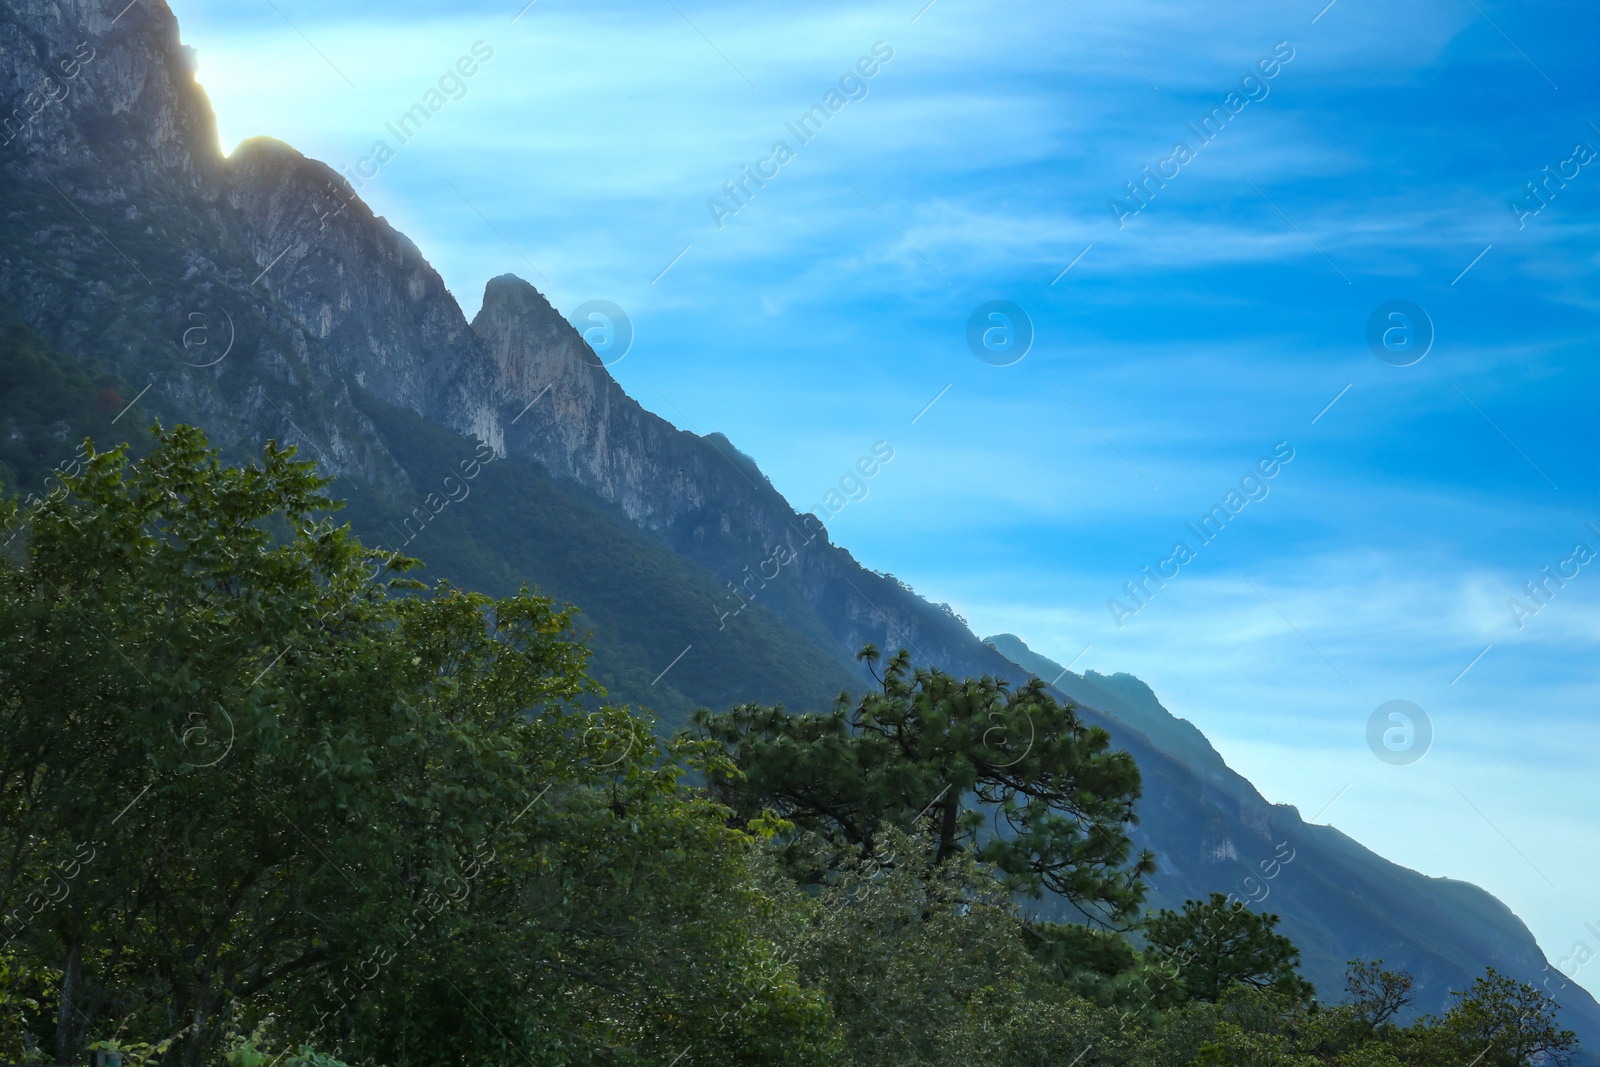 Photo of Big mountains and trees under blue sky on sunny day